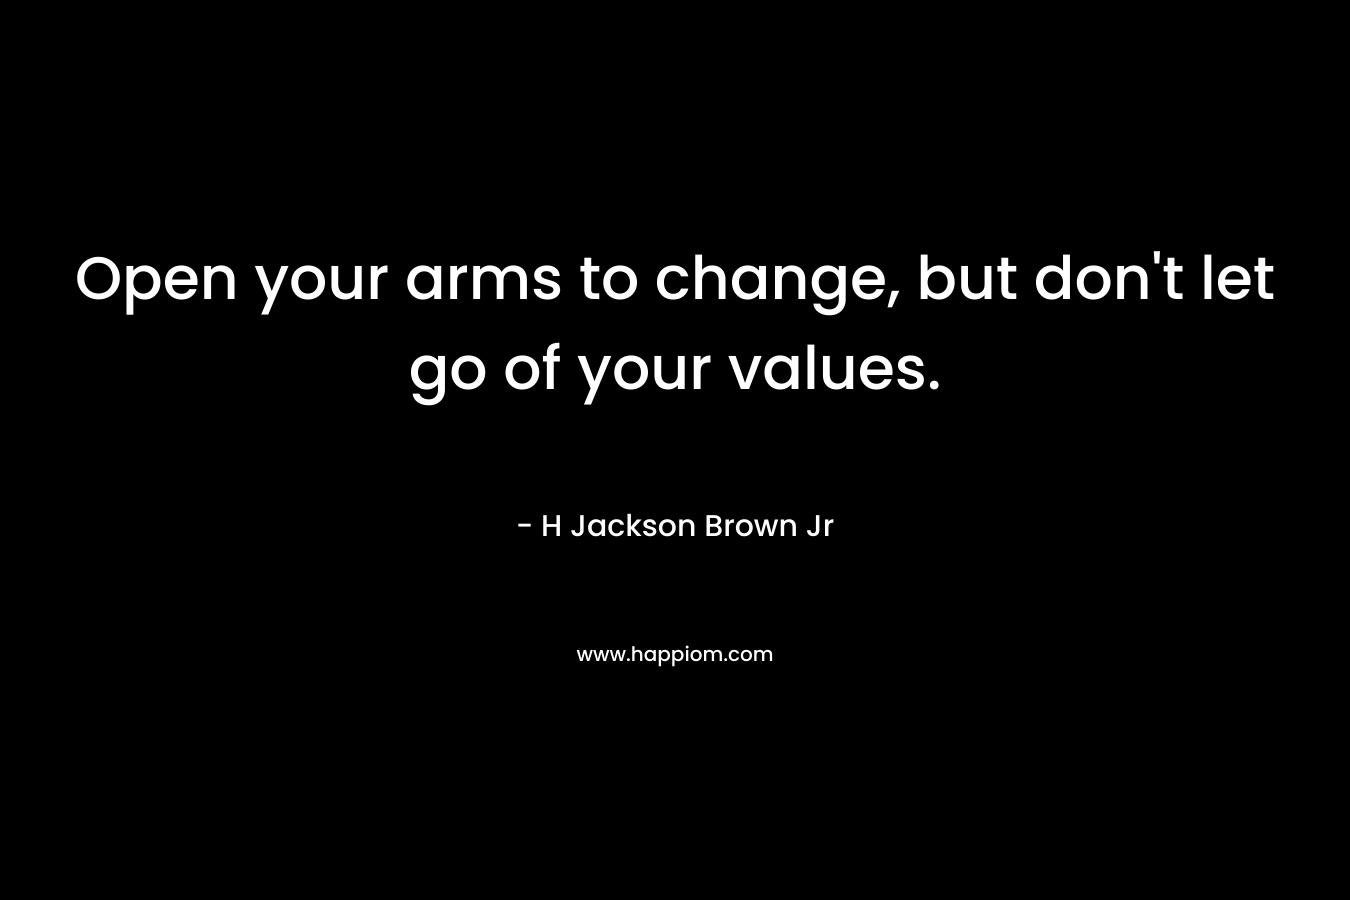 Open your arms to change, but don’t let go of your values. – H Jackson Brown Jr